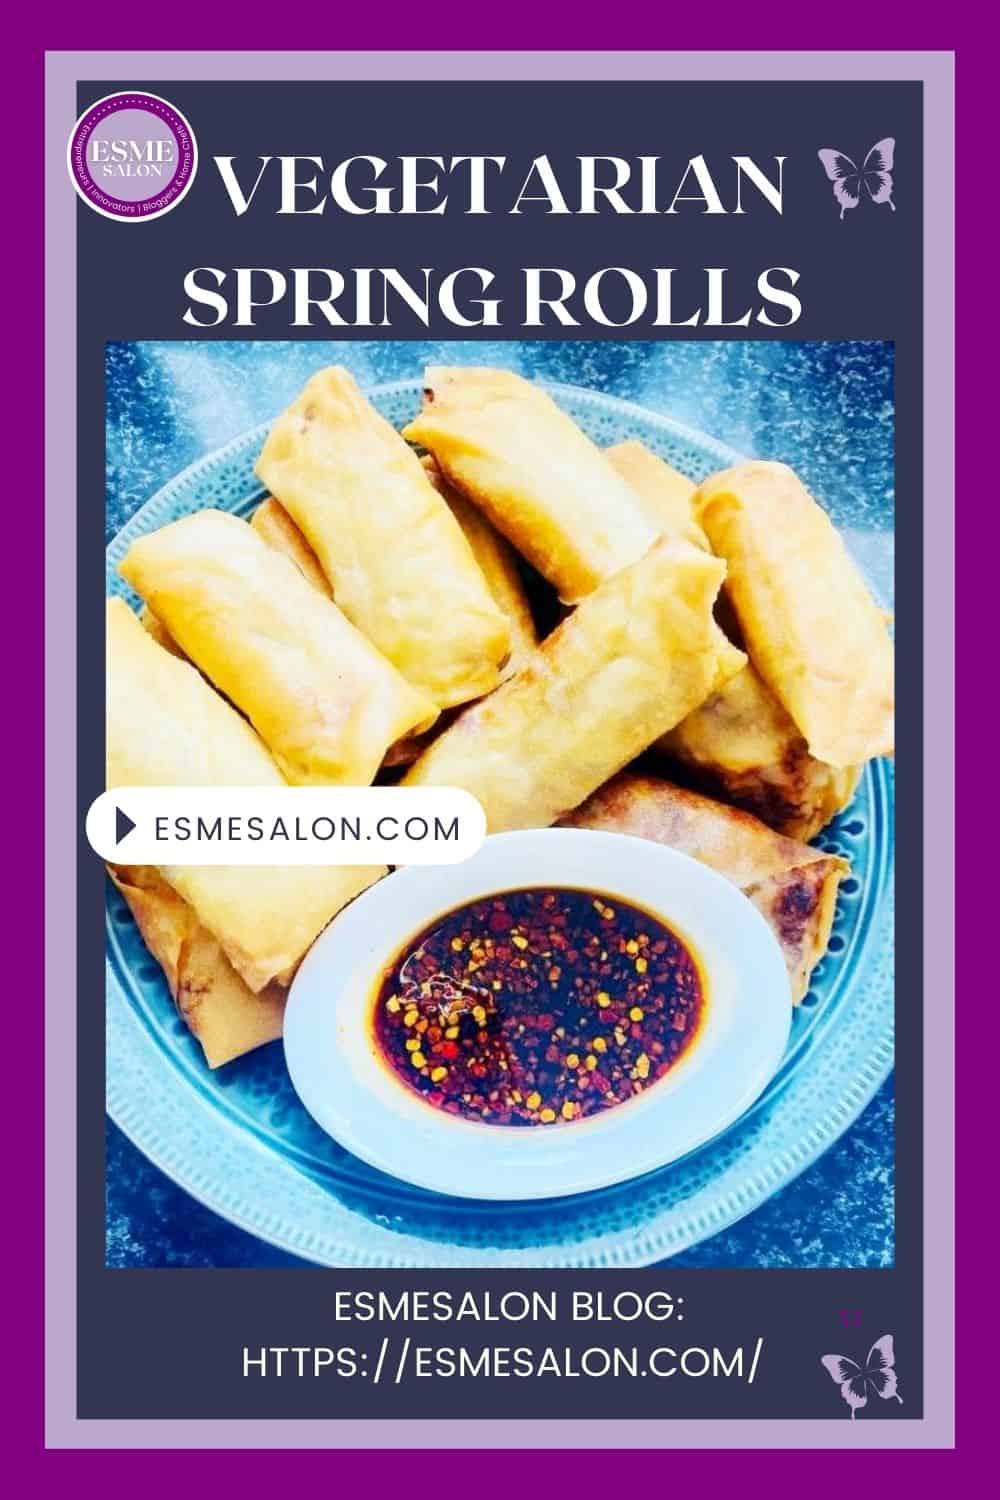 An image of a plate of Vegetarian Spring Rolls with Asian Chile Dipping Sauce